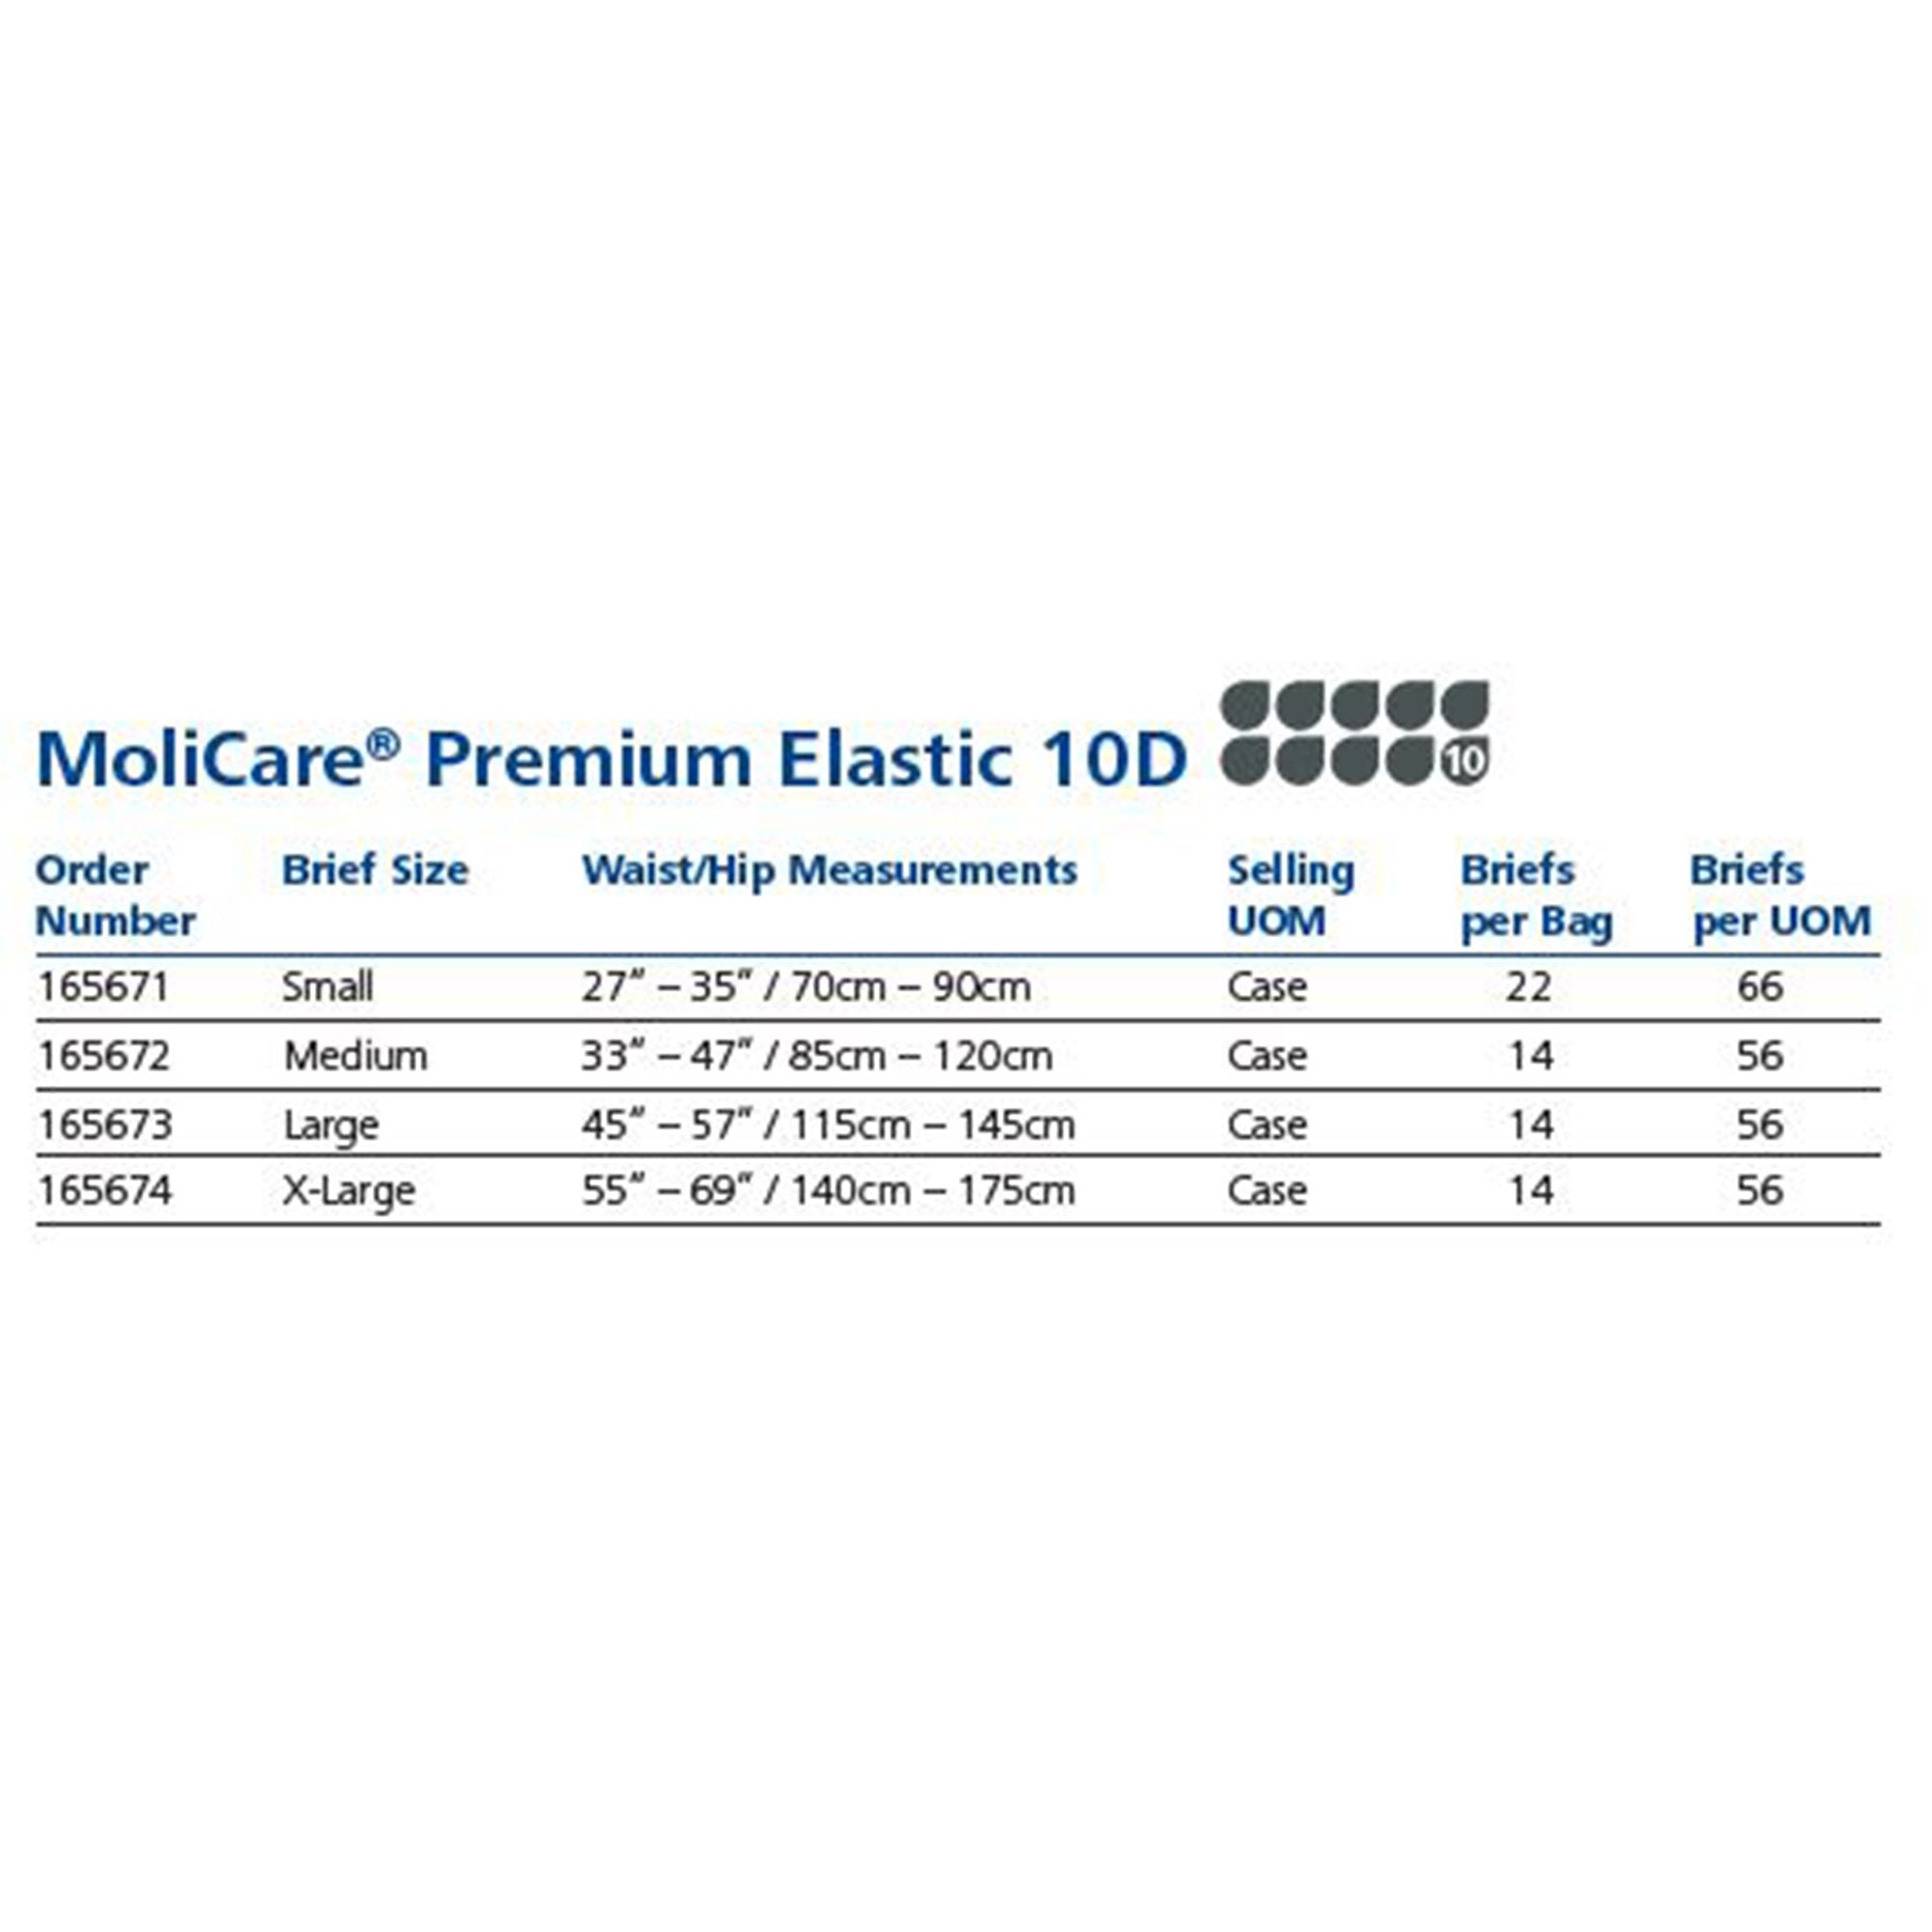 Unisex Adult Incontinence Brief MoliCare® Premium Elastic 10D Large Disposable Heavy Absorbency